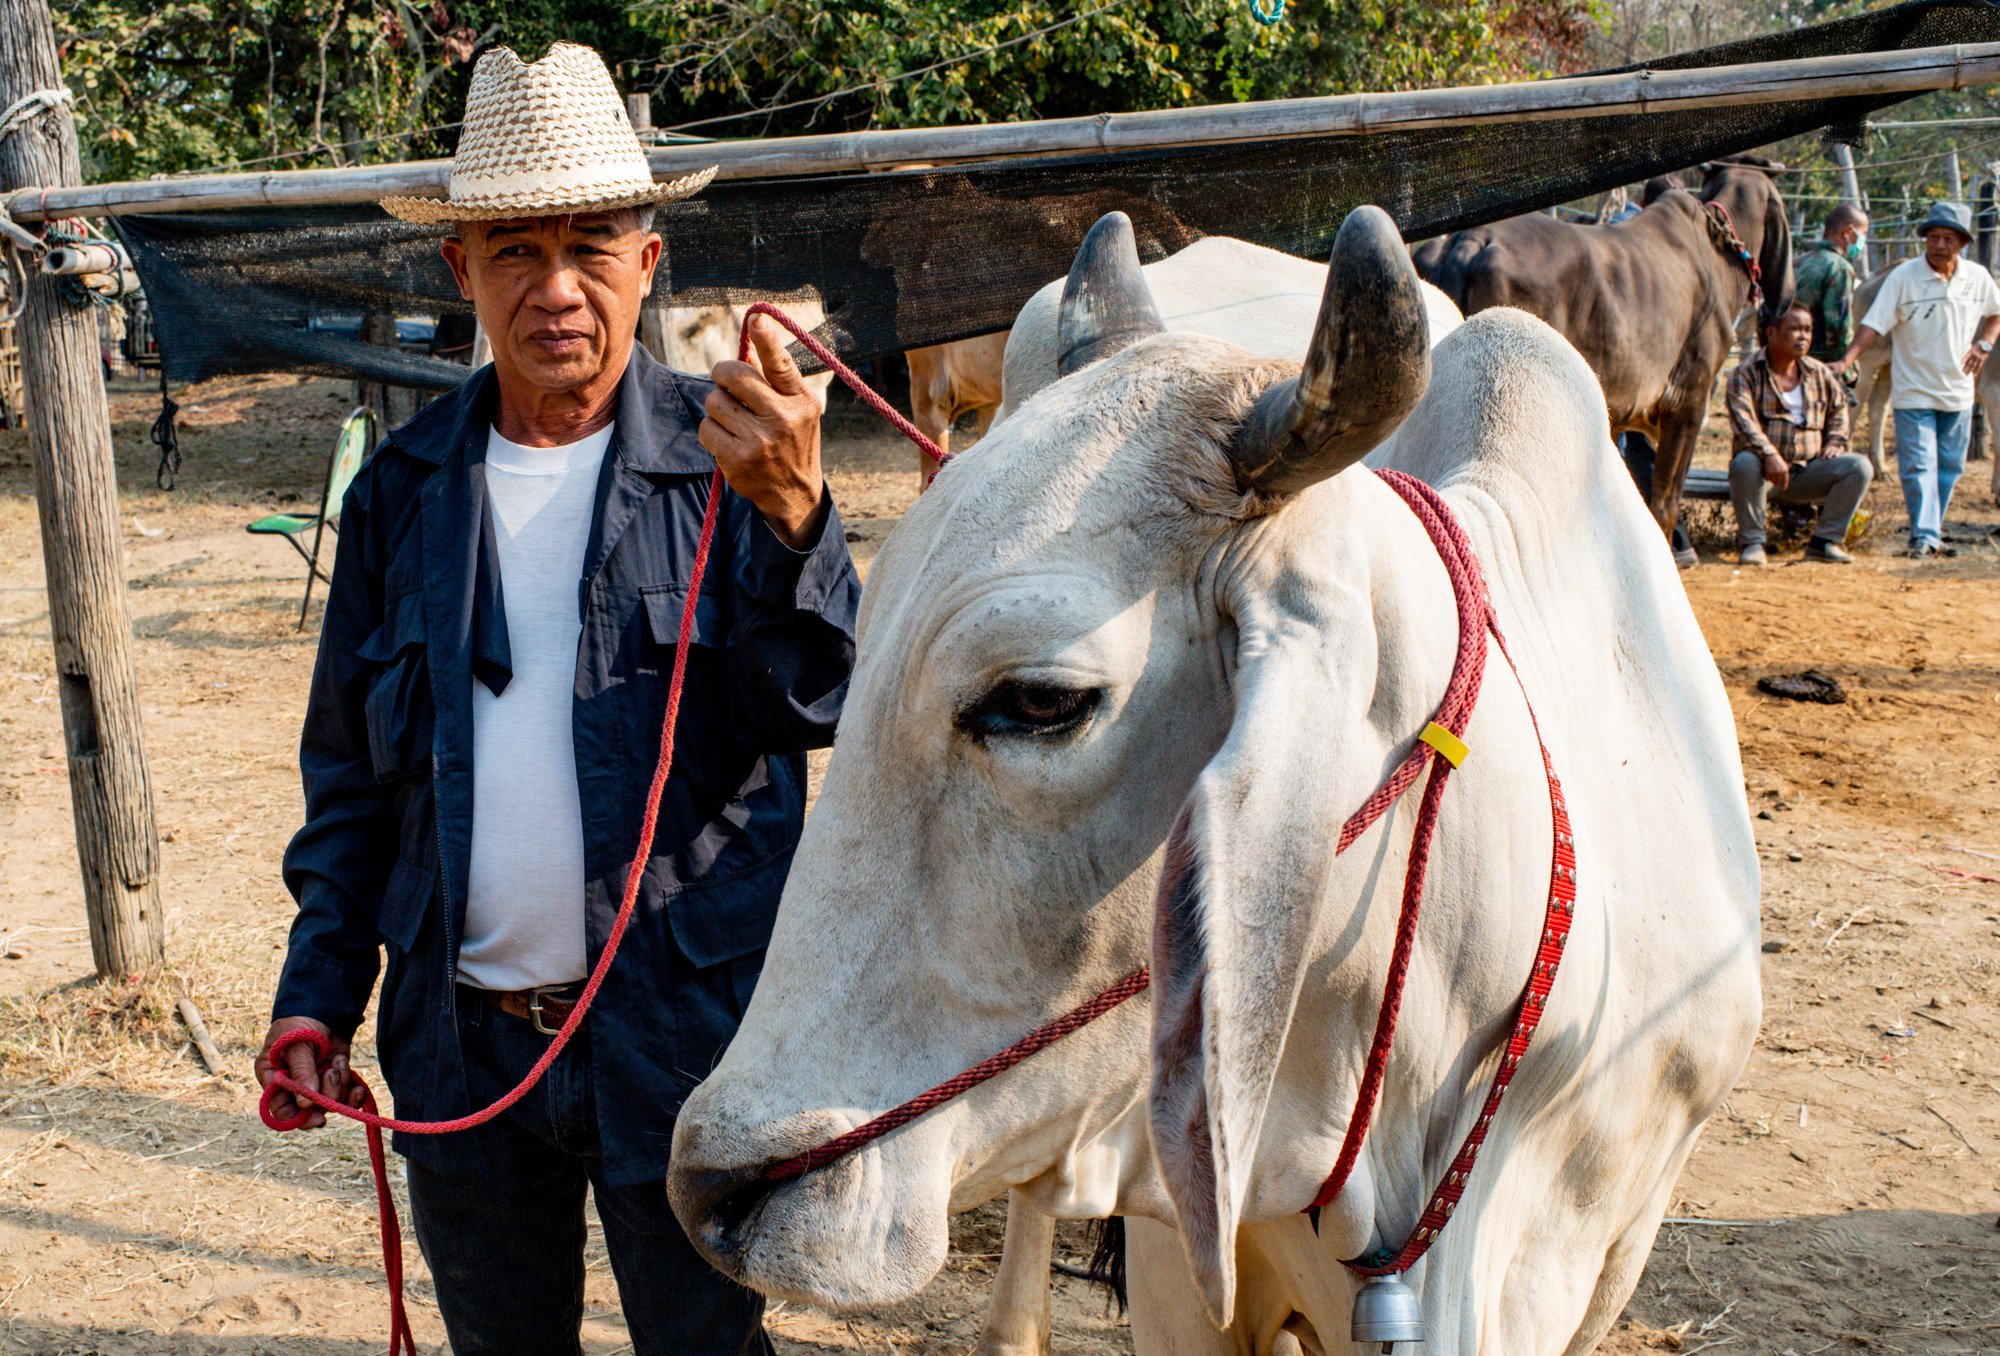 A farmer shows off one of his cows at a rural cattle market in Northern Thailand. Make photo essays